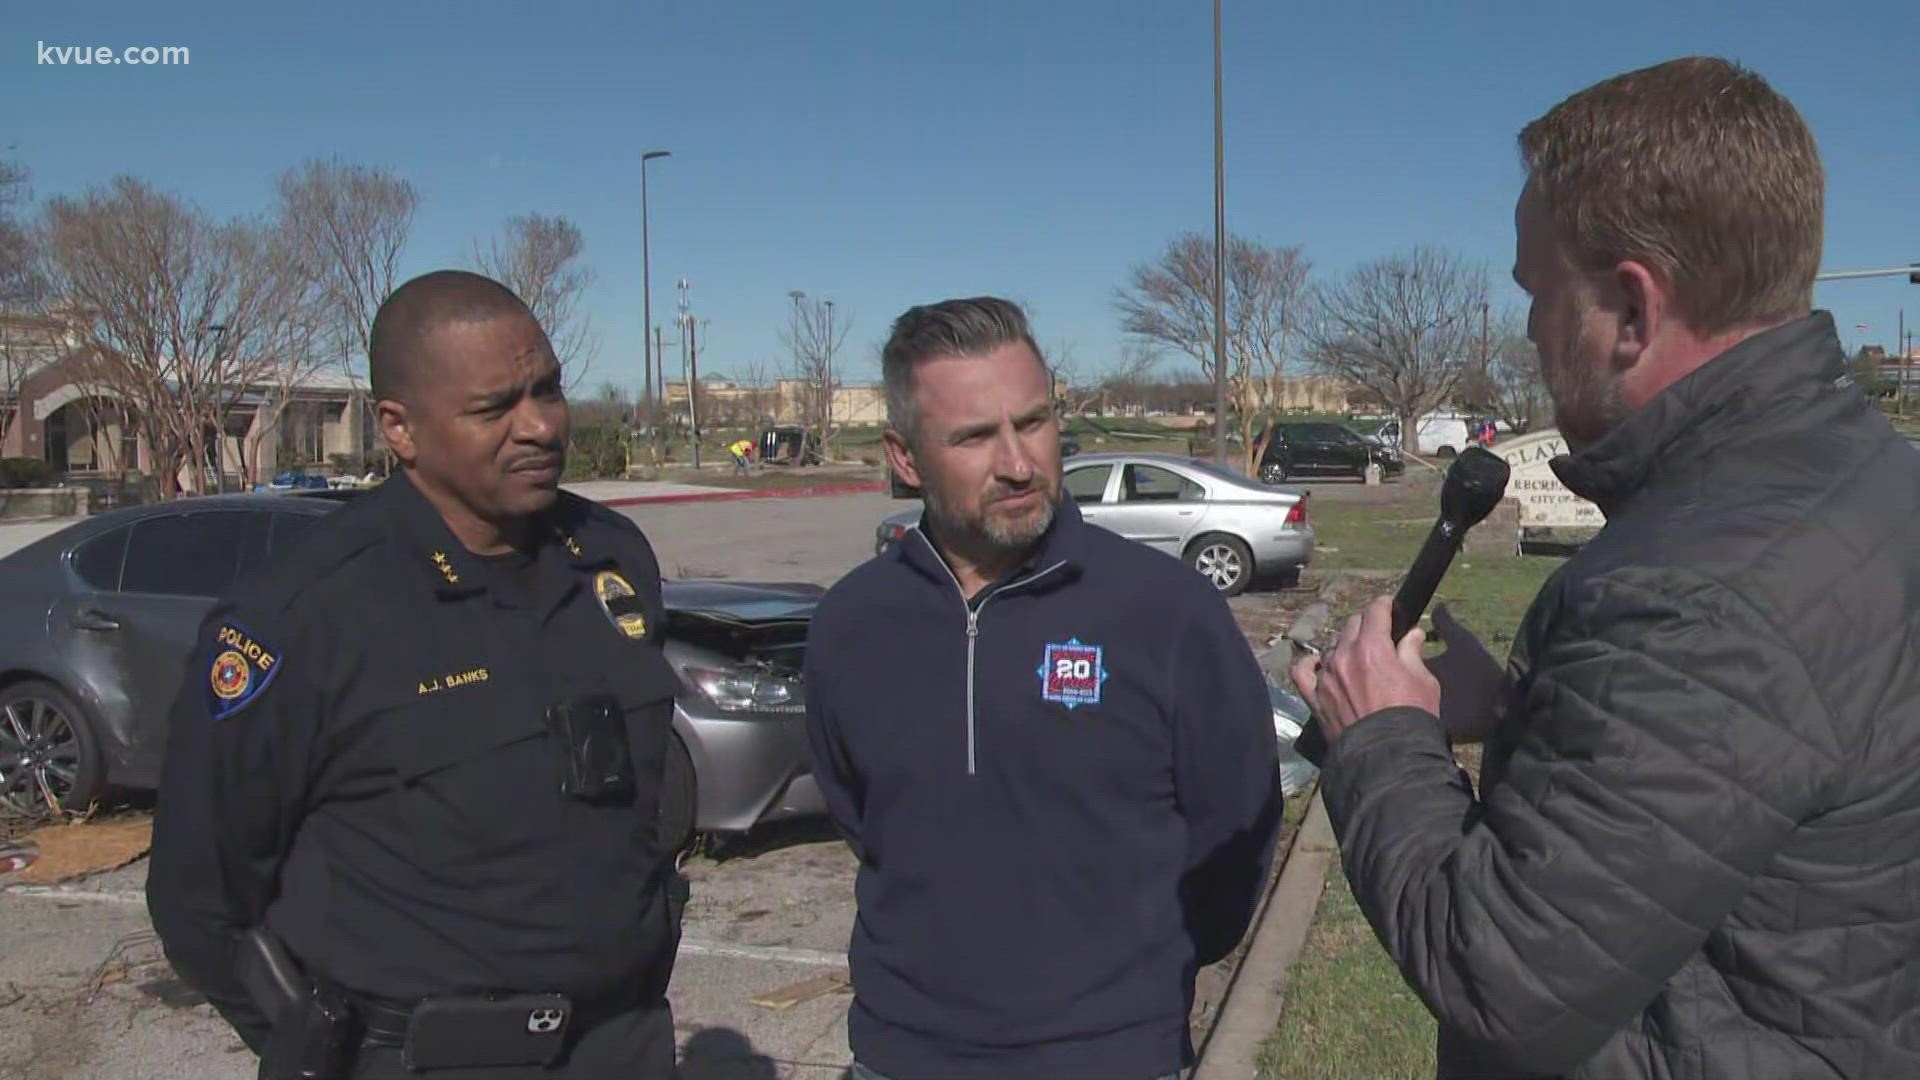 Mayor Morgan and Chief Banks talk about the city's response to the severe weather and damage it left behind and how residents can receive help and help others.